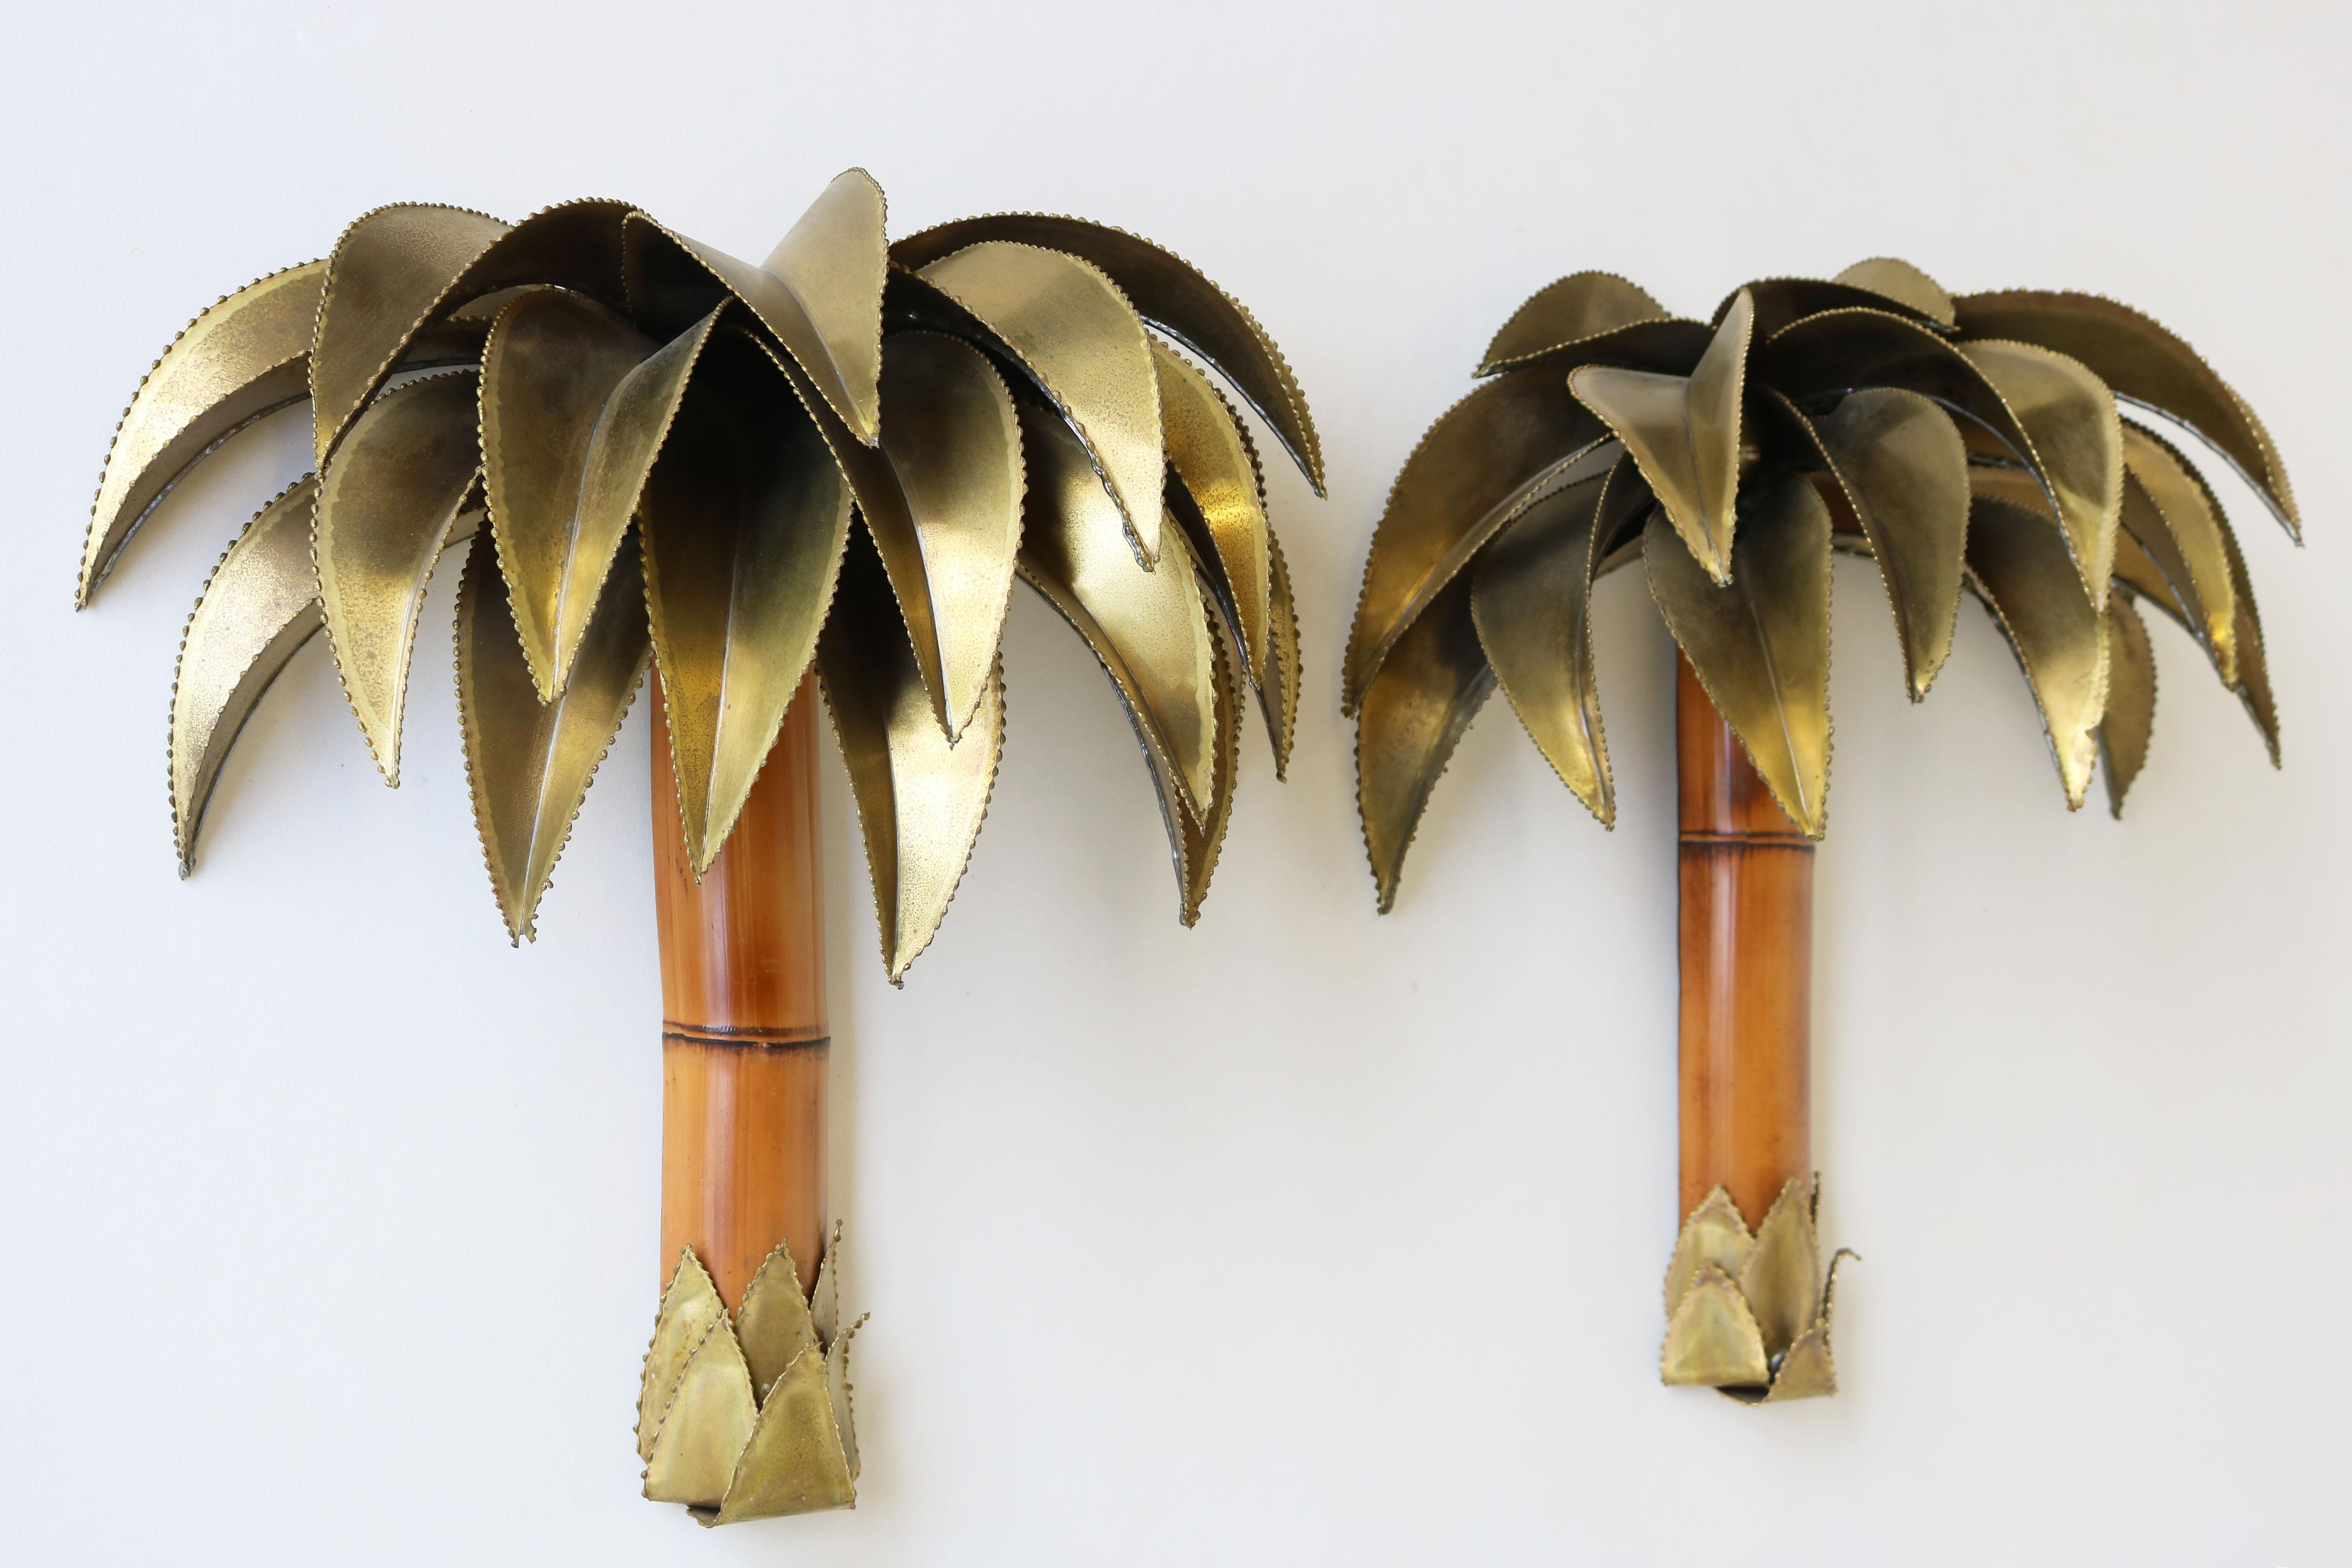 French Pair of Maison Jansen Palm Tree Wall Lights / Sconces 1960 Brass Bamboo Regency